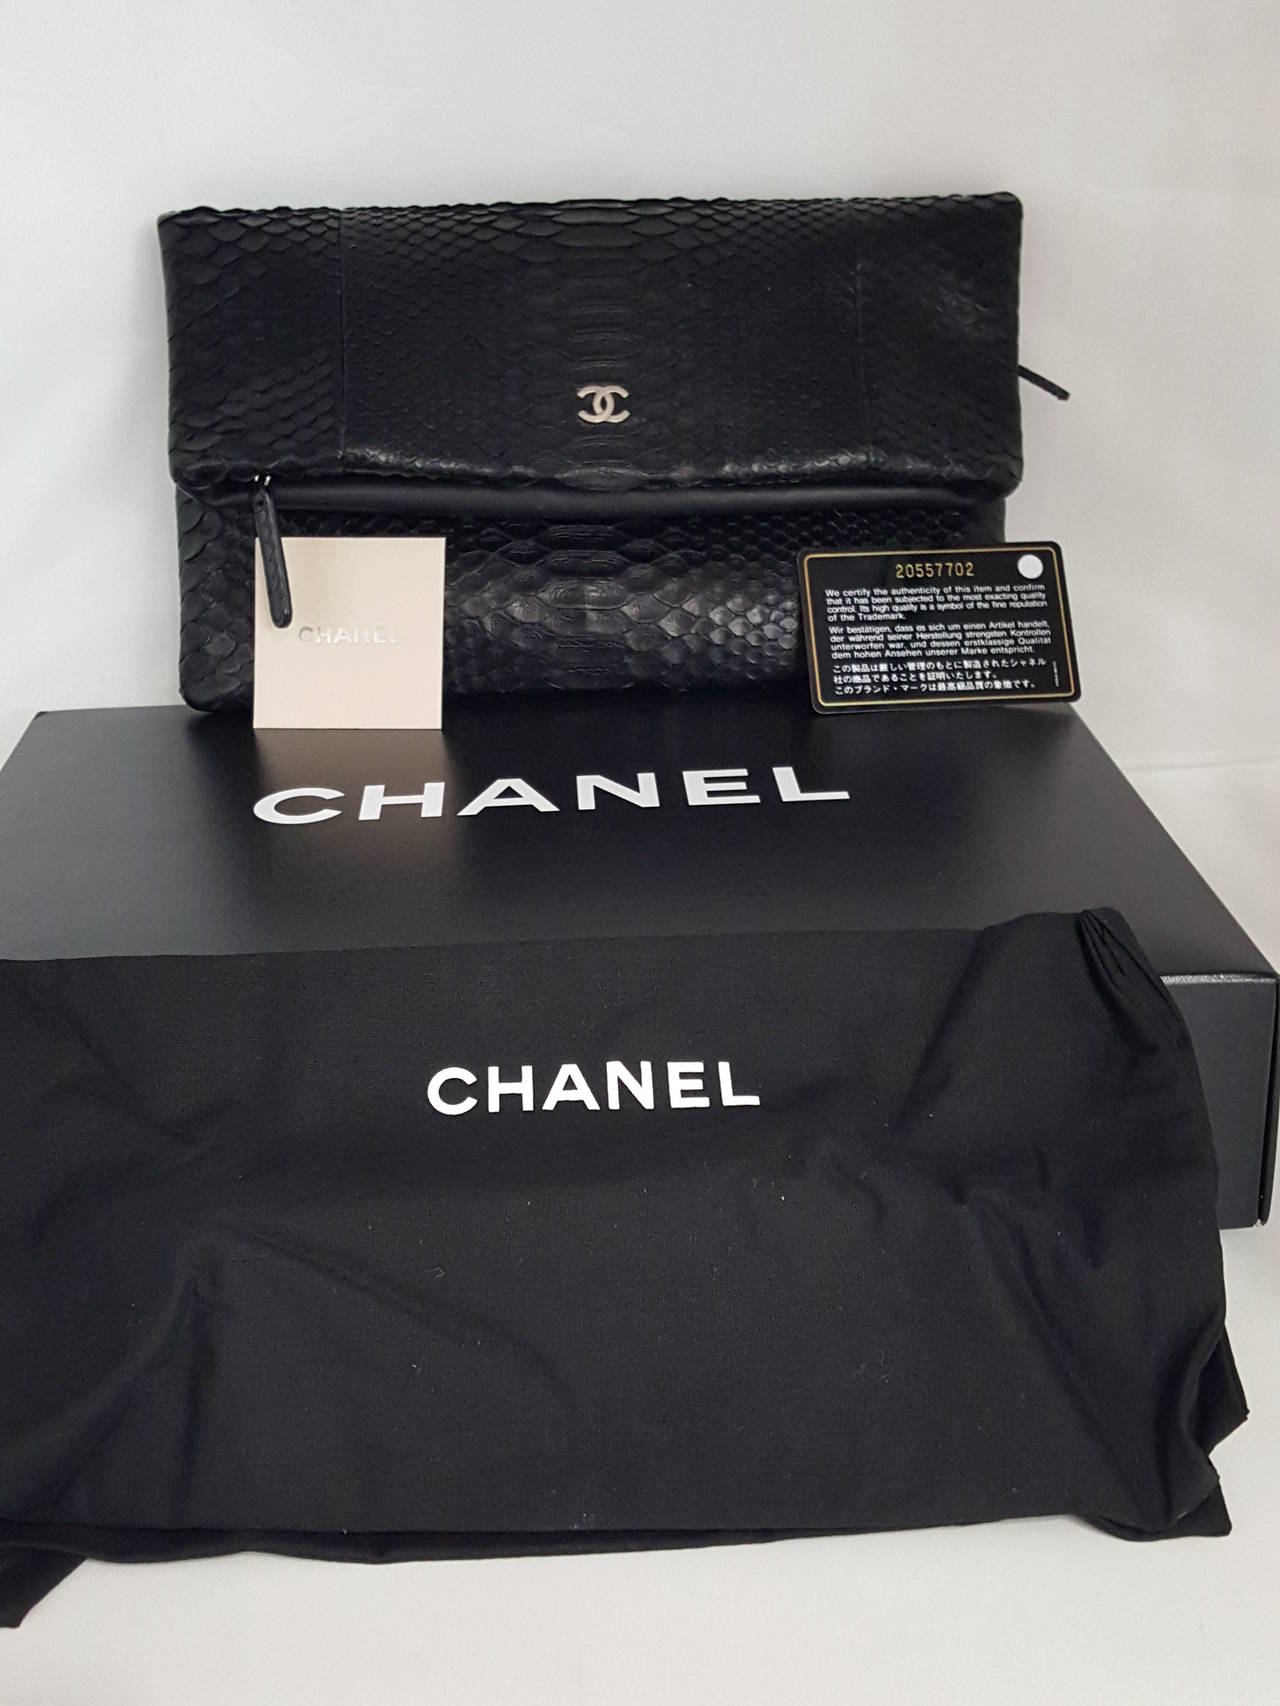 CHANEL Black Python Fold Over Clutch With Silver Hardware.  NWOT 4